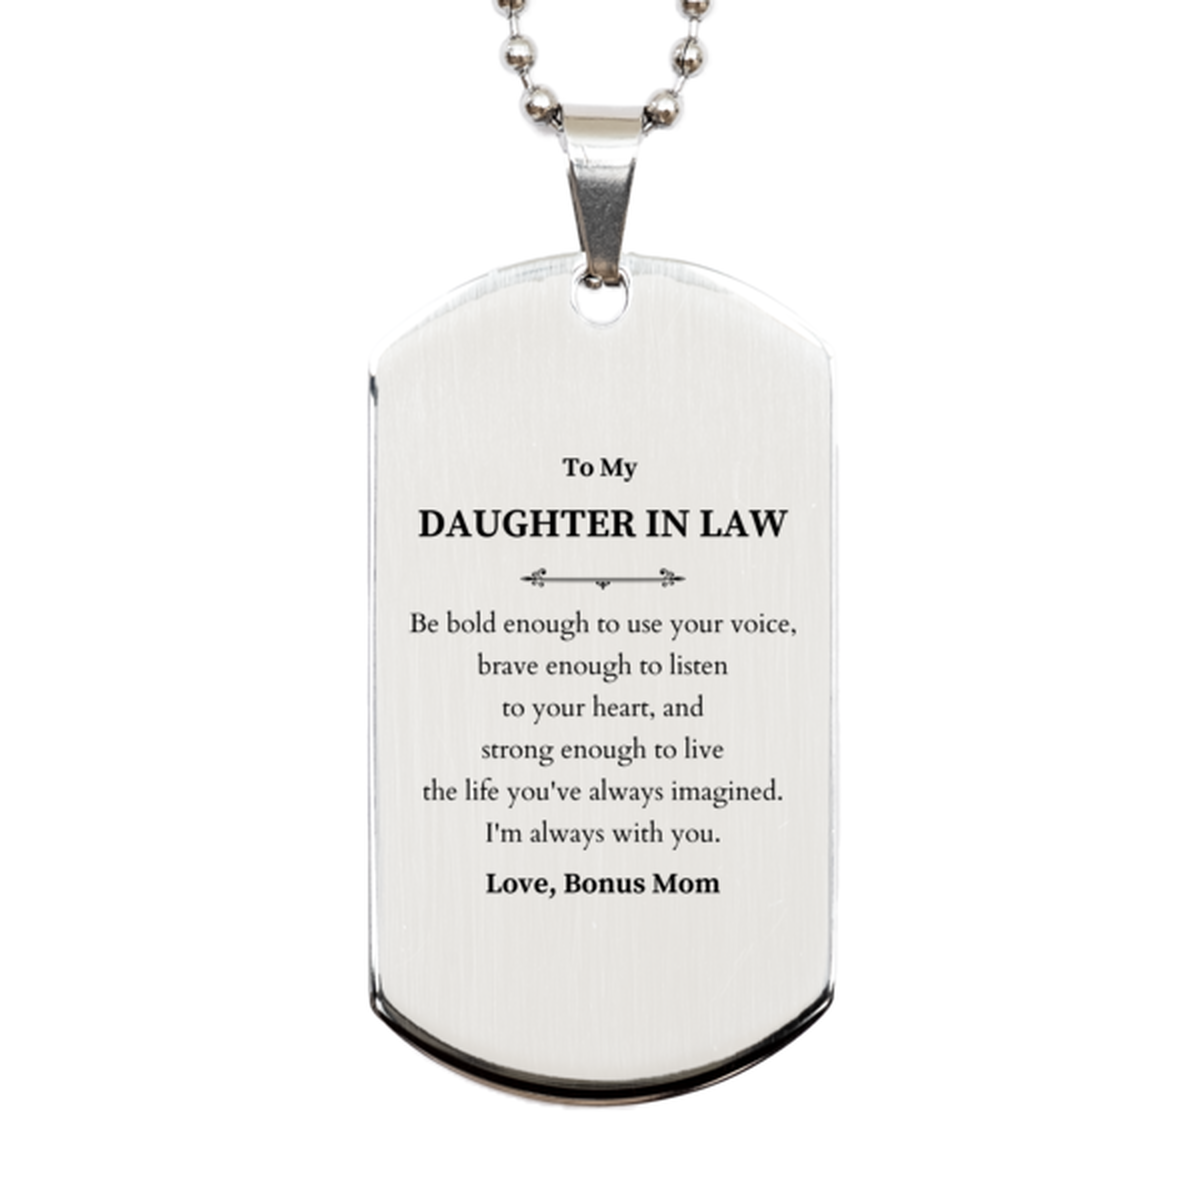 Keepsake Daughter In Law Silver Dog Tag Gift Idea Graduation Christmas Birthday Daughter In Law from Bonus Mom, Daughter In Law Be bold enough to use your voice, brave enough to listen to your heart. Love, Bonus Mom